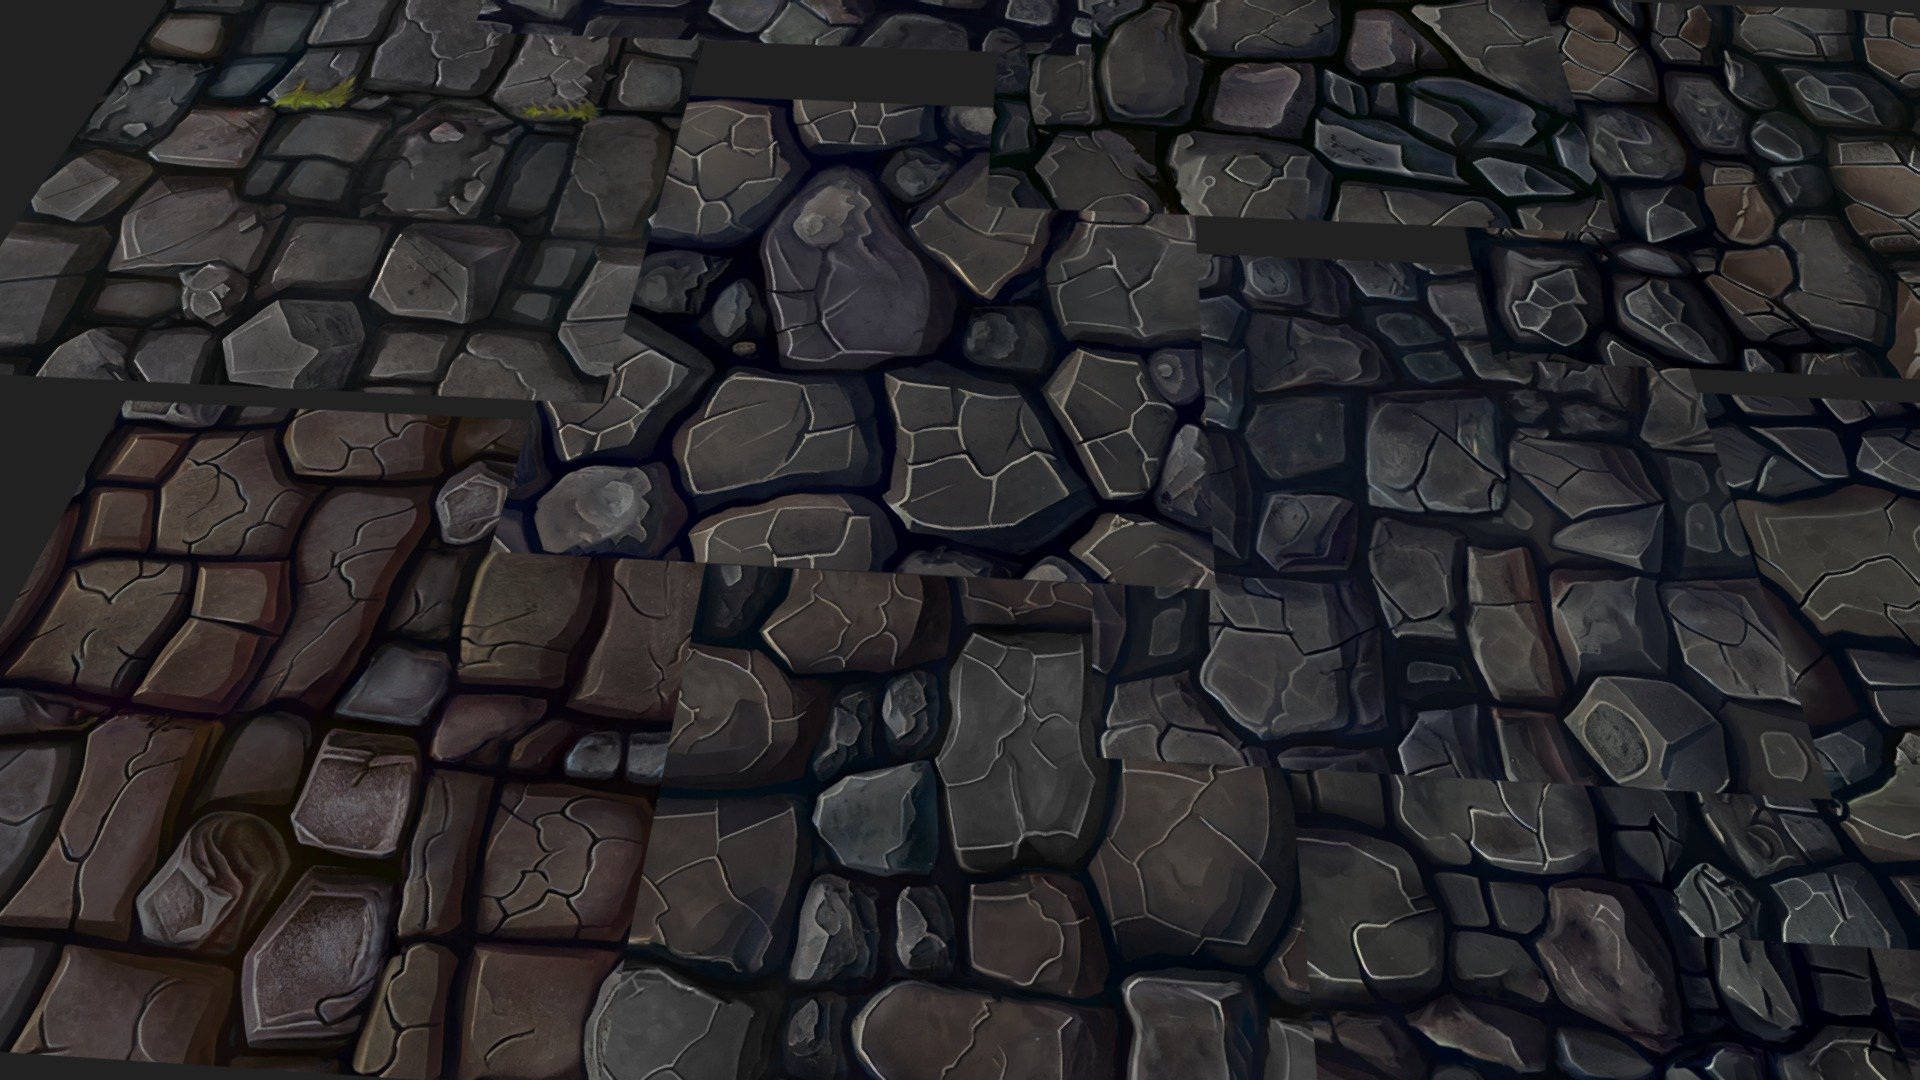 The rocky road brought you to the dungeon entrance. Footsteps echoing off ancient stone.

The gleaming floor reflects your torchlight, leading you to a new adventure …With our tileable textures :)




20 Color Textures (seamless)

2048 x 2048 size

Hand Painted

Mobile friendly

Help us by rating and commenting, this will motivate us to create more assets and improve - Dungeon & Stone Road 20 TEXTURES, Handpaint #2 - Buy Royalty Free 3D model by Texture Me (@textureme) 3d model